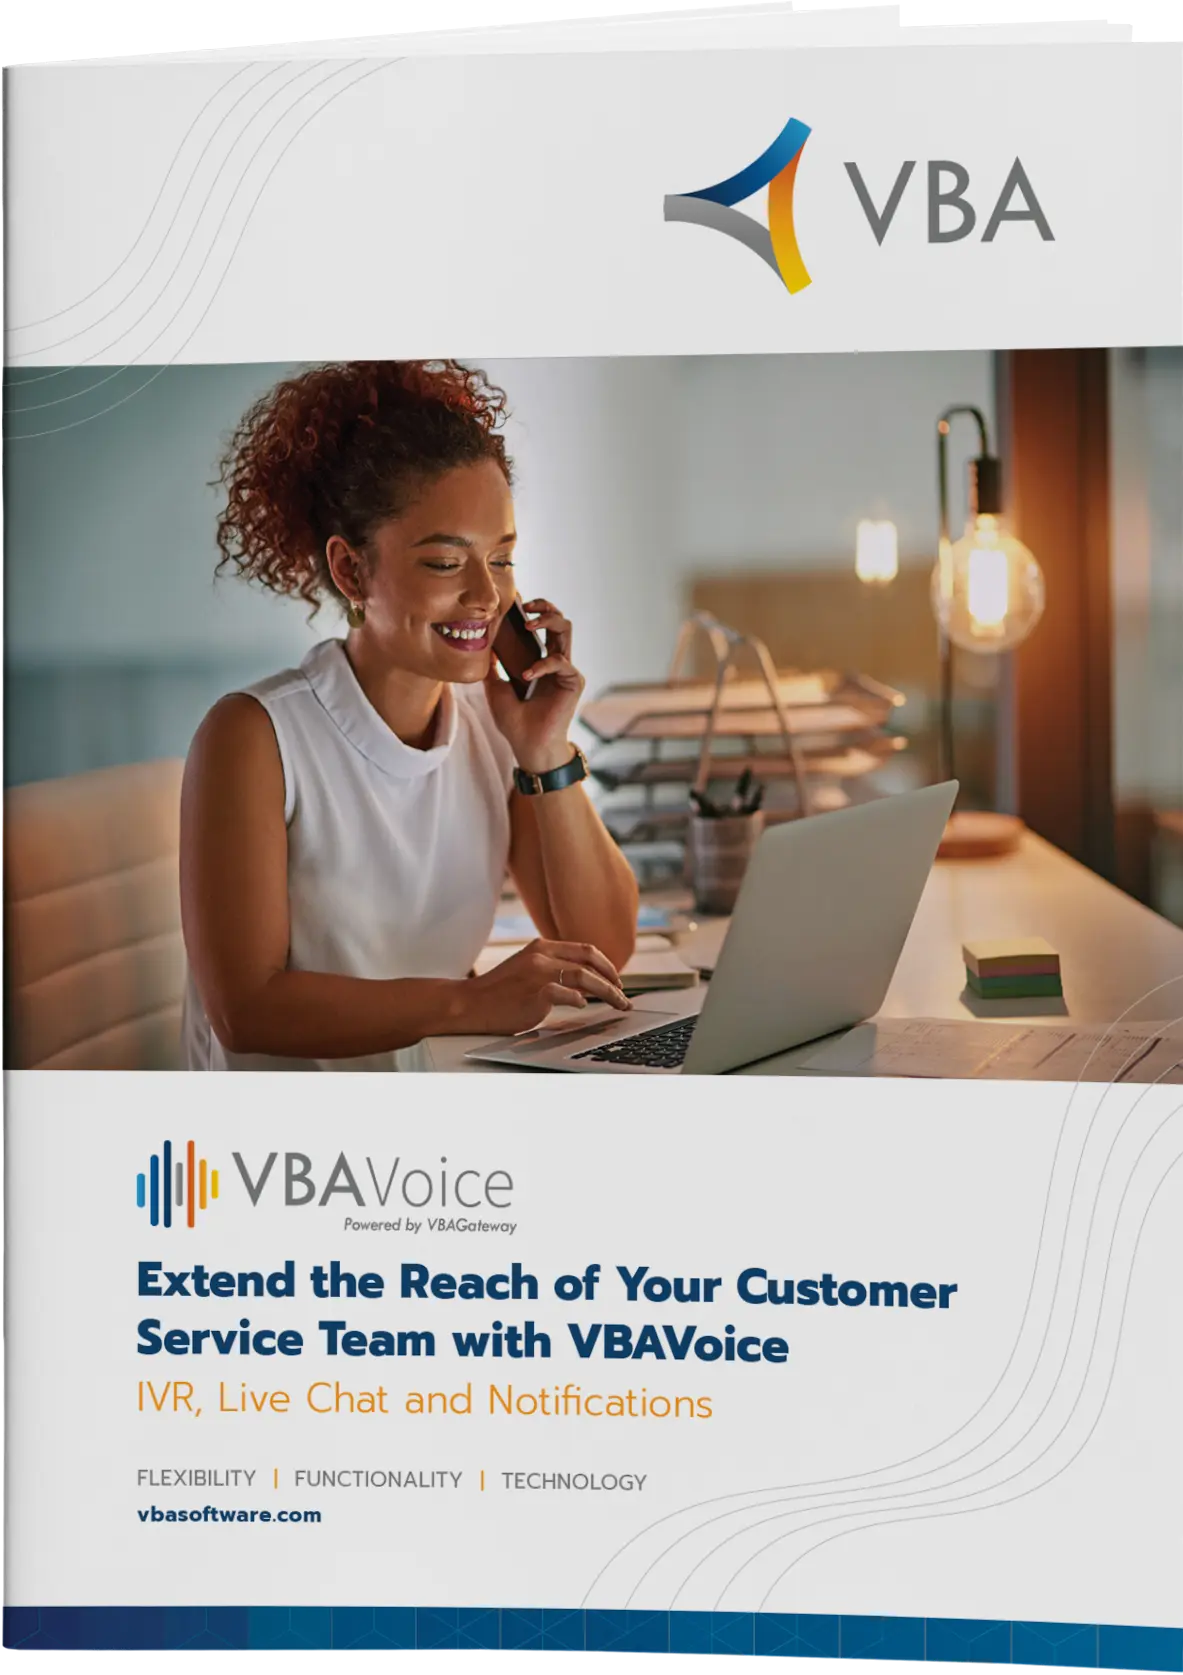 Extend the reach of your customer service team with VBA voice